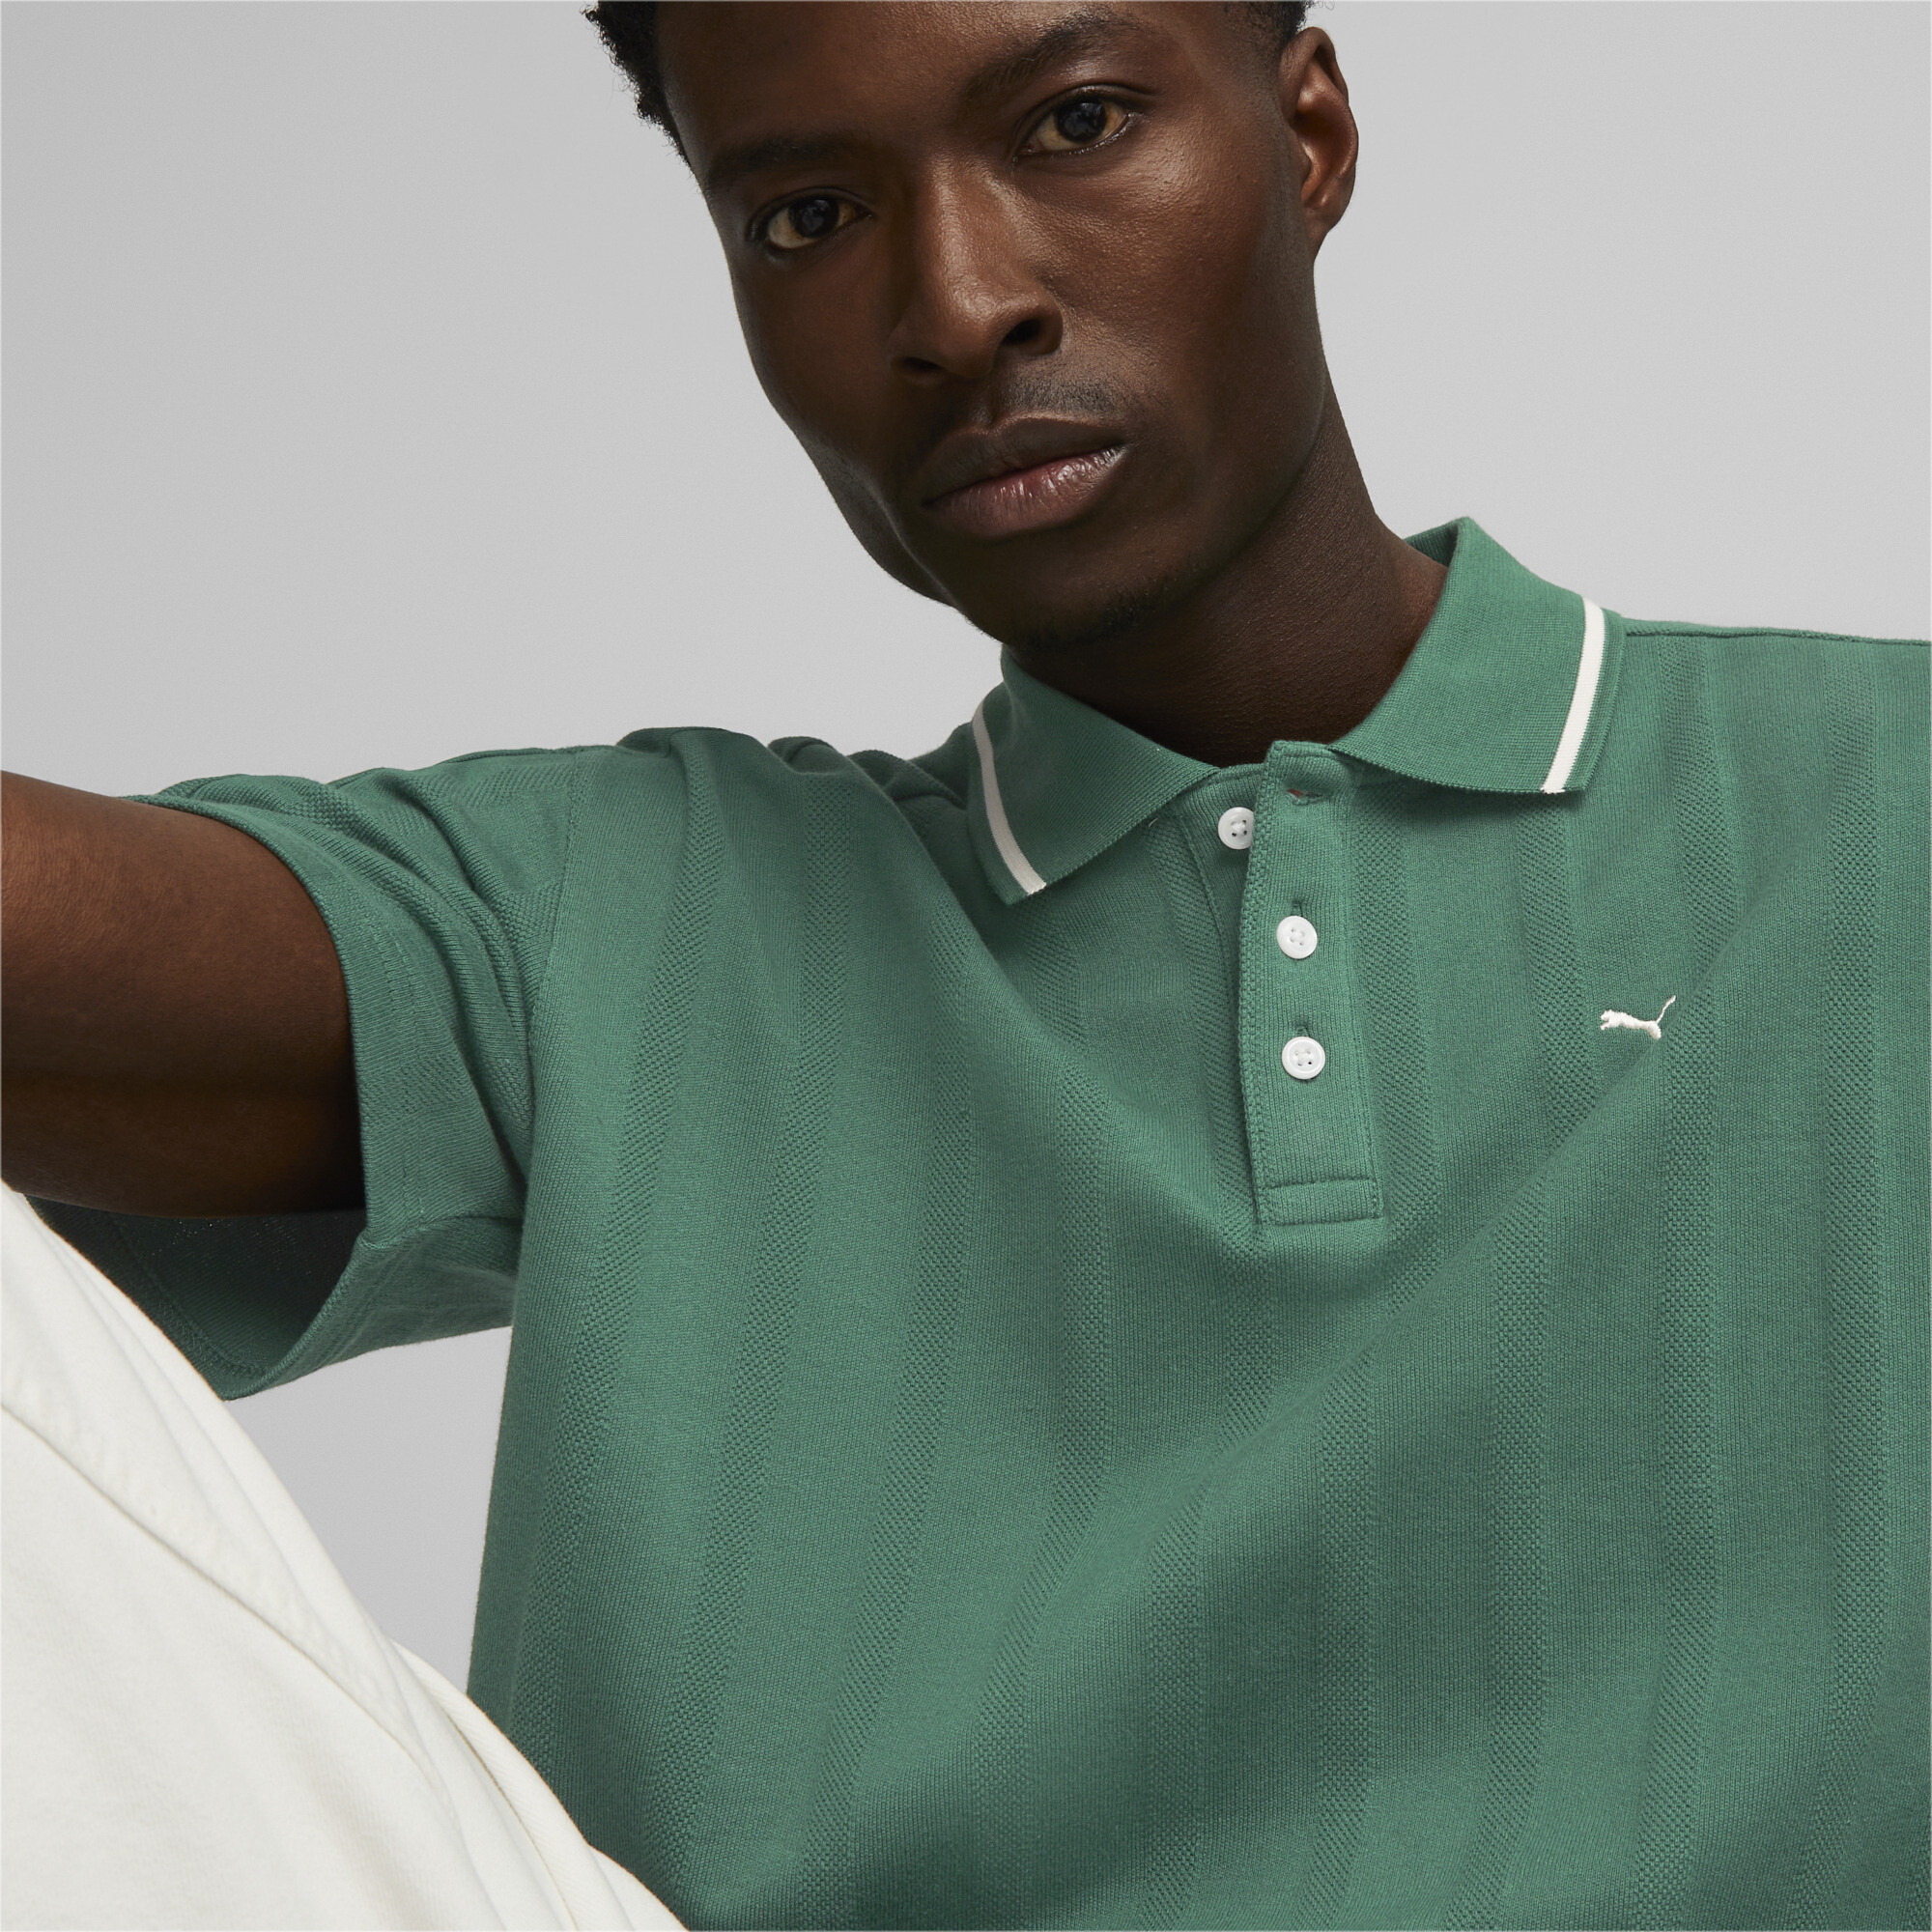 Men's PUMA MMQ T7 Polo Shirt In Green, Size Large